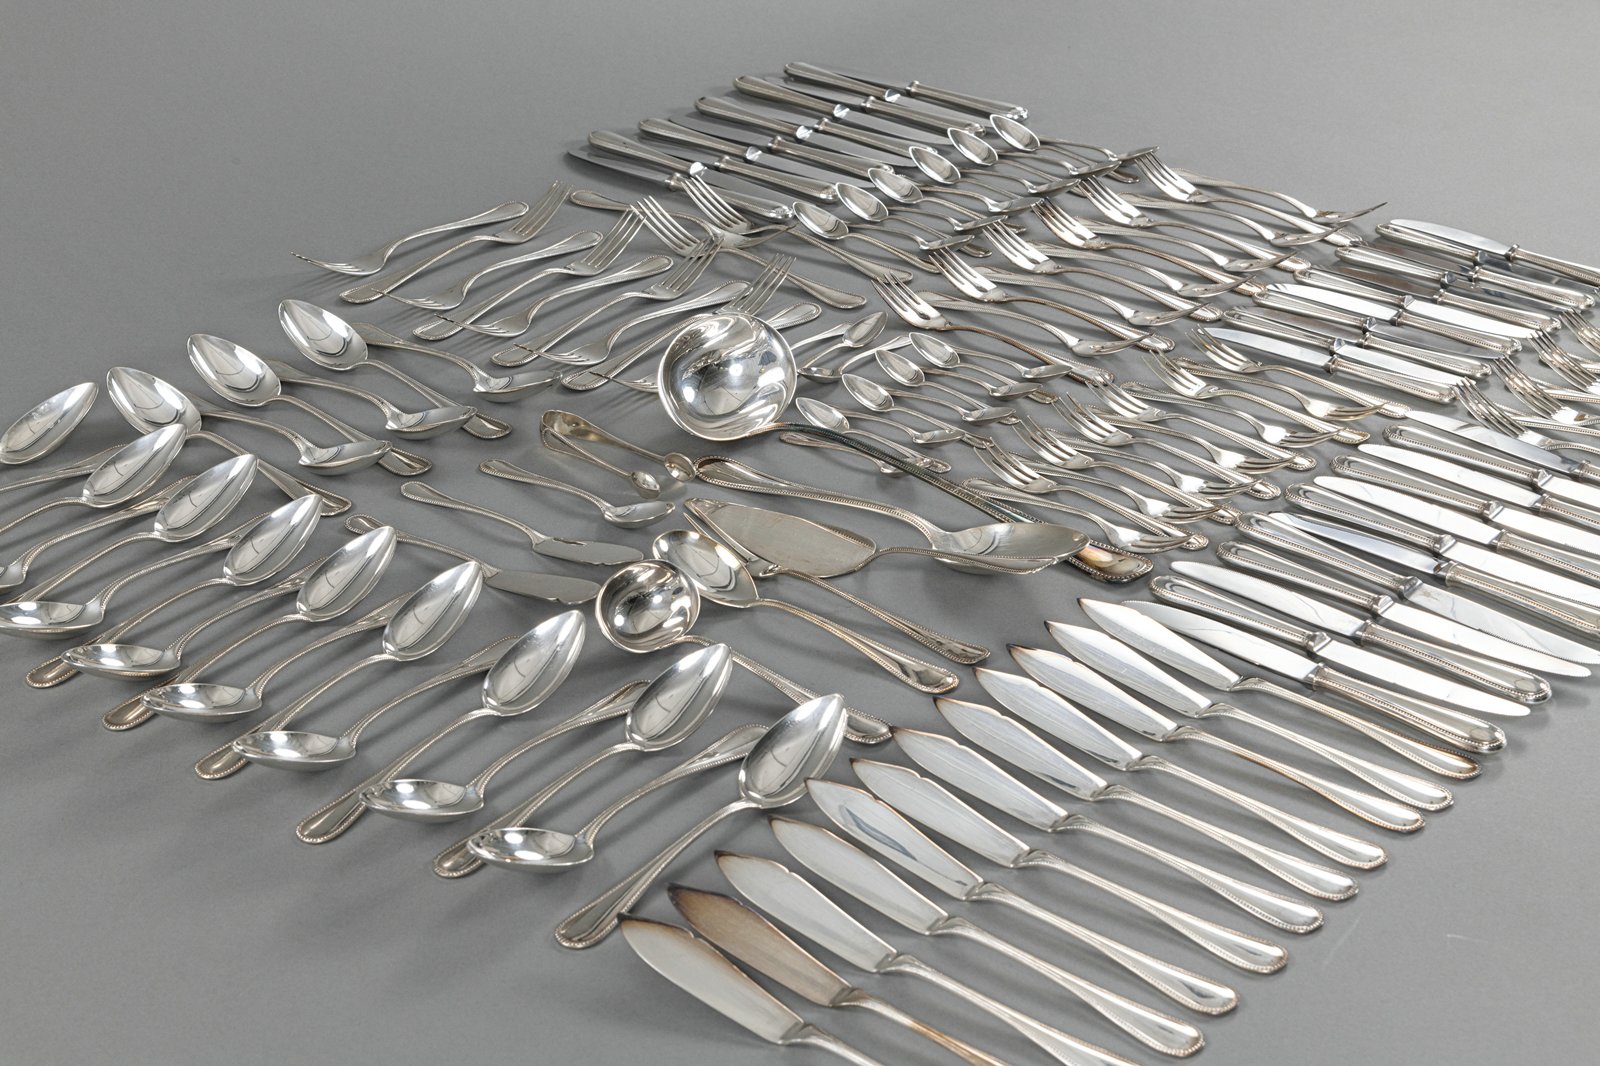 A SILVER CUTLERY FOR MOSTLY 11-12 PEOPLE - Image 7 of 12